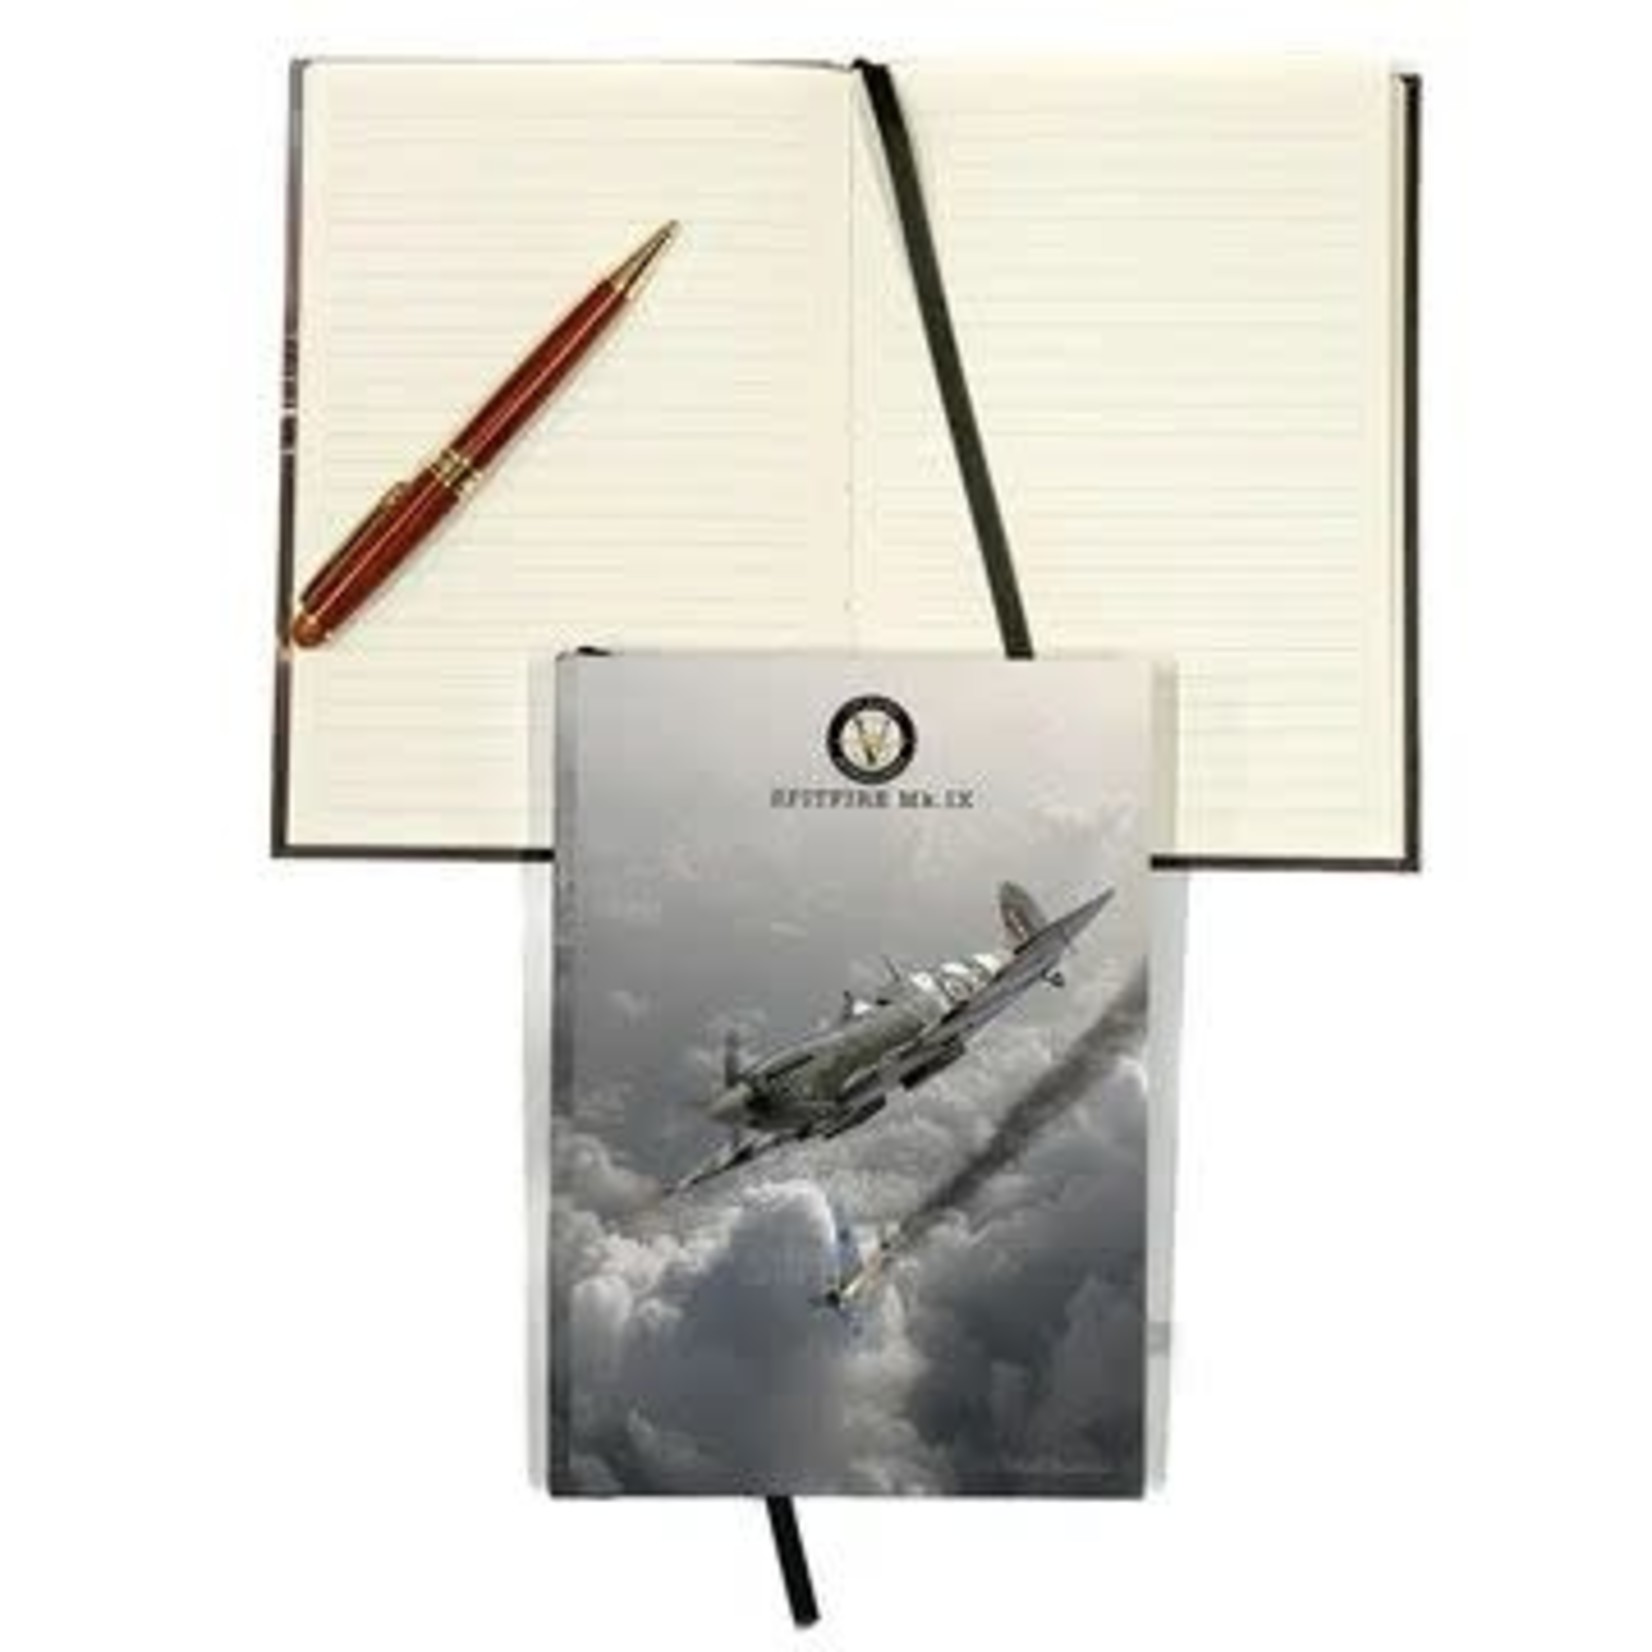 Aviation and Space Spitfire MKIX Hard Cover Journal